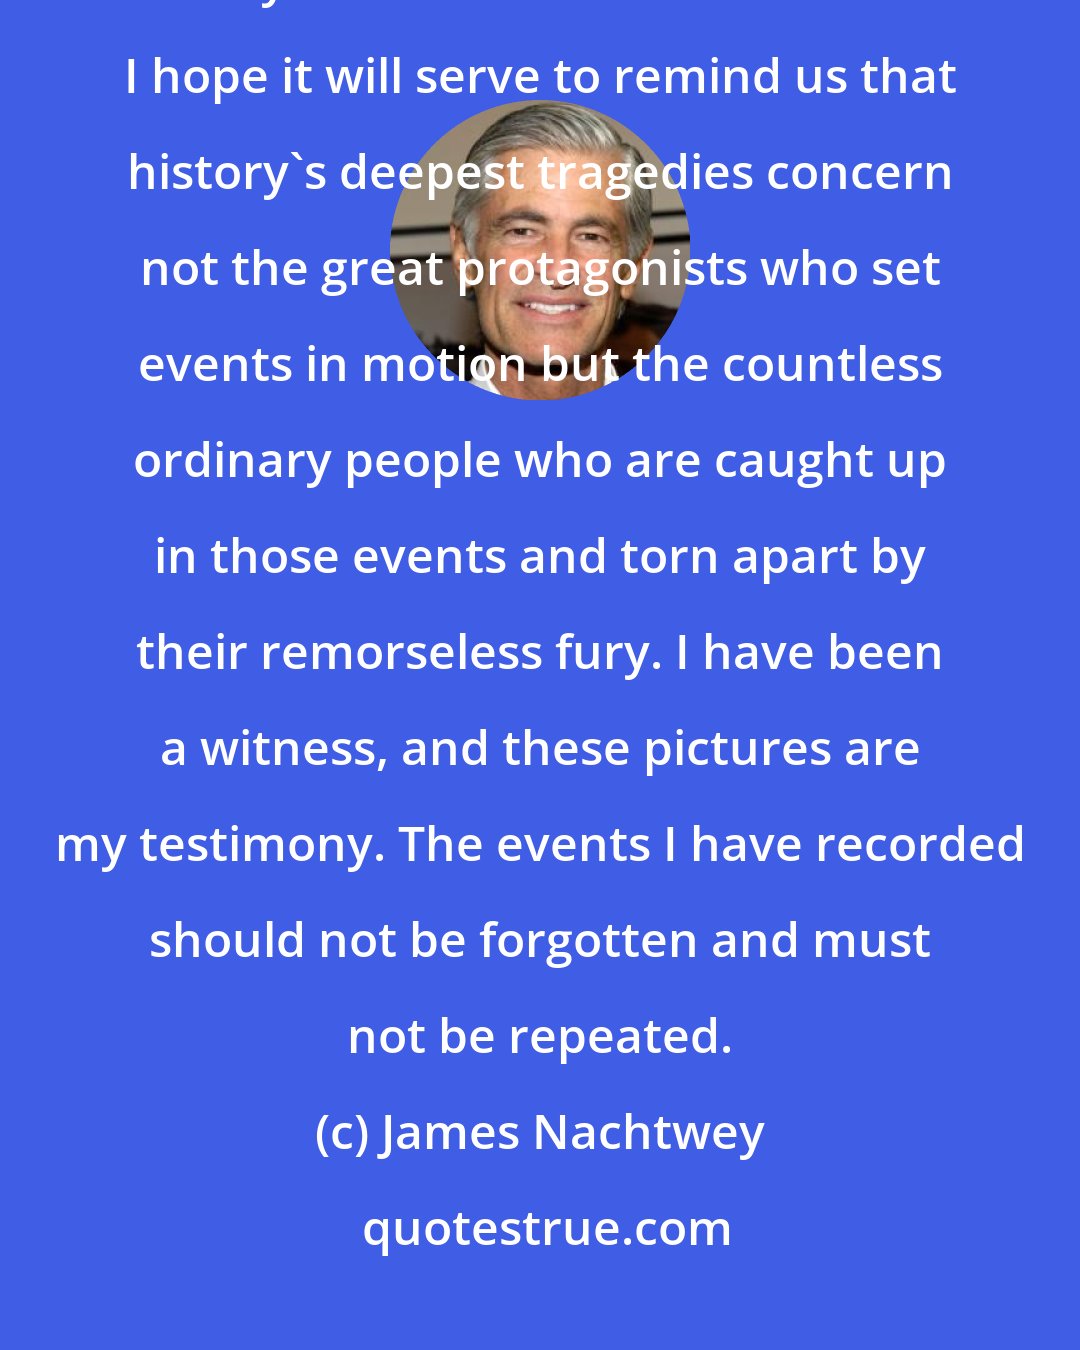 James Nachtwey: I want my work to become part of our visual history, to enter our collective memory and our collective conscience. I hope it will serve to remind us that history's deepest tragedies concern not the great protagonists who set events in motion but the countless ordinary people who are caught up in those events and torn apart by their remorseless fury. I have been a witness, and these pictures are my testimony. The events I have recorded should not be forgotten and must not be repeated.